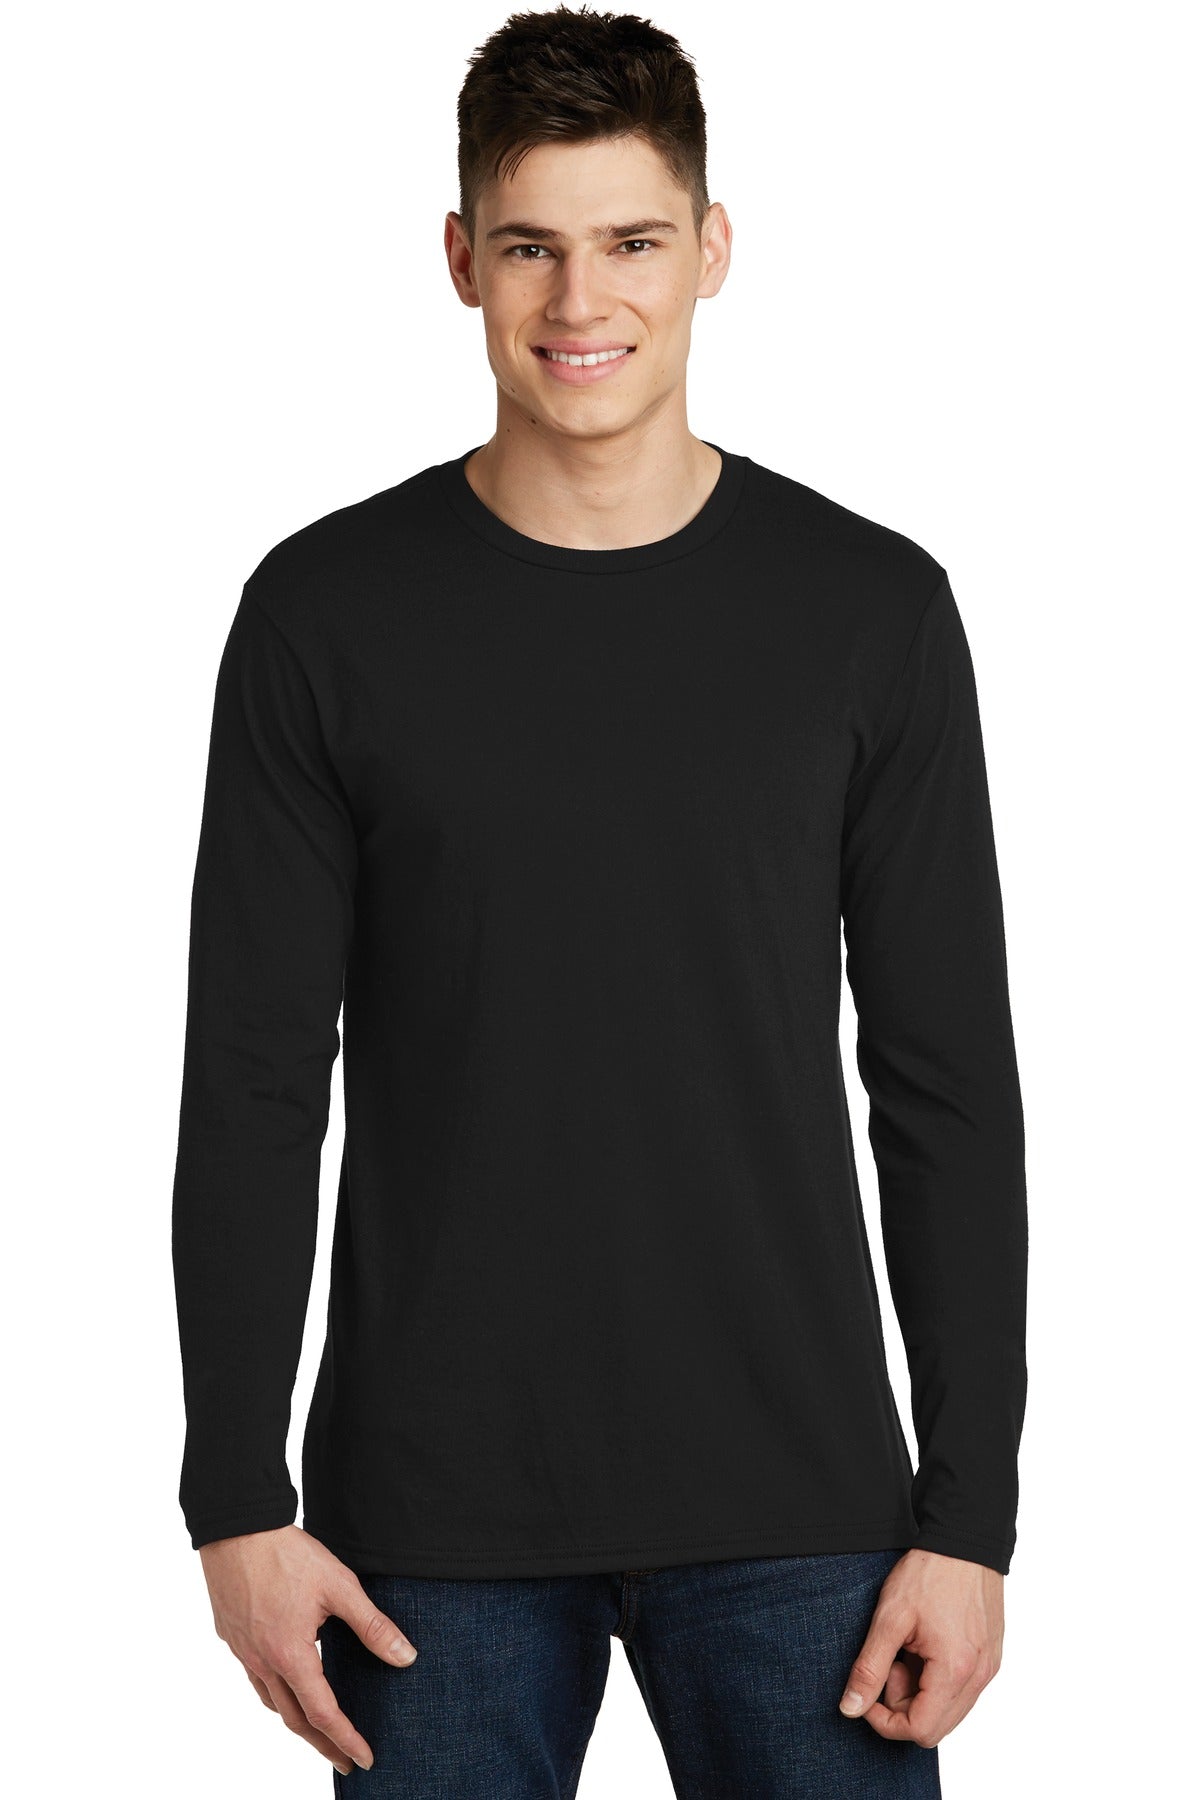 District® Very Important Tee® Long Sleeve. DT6200